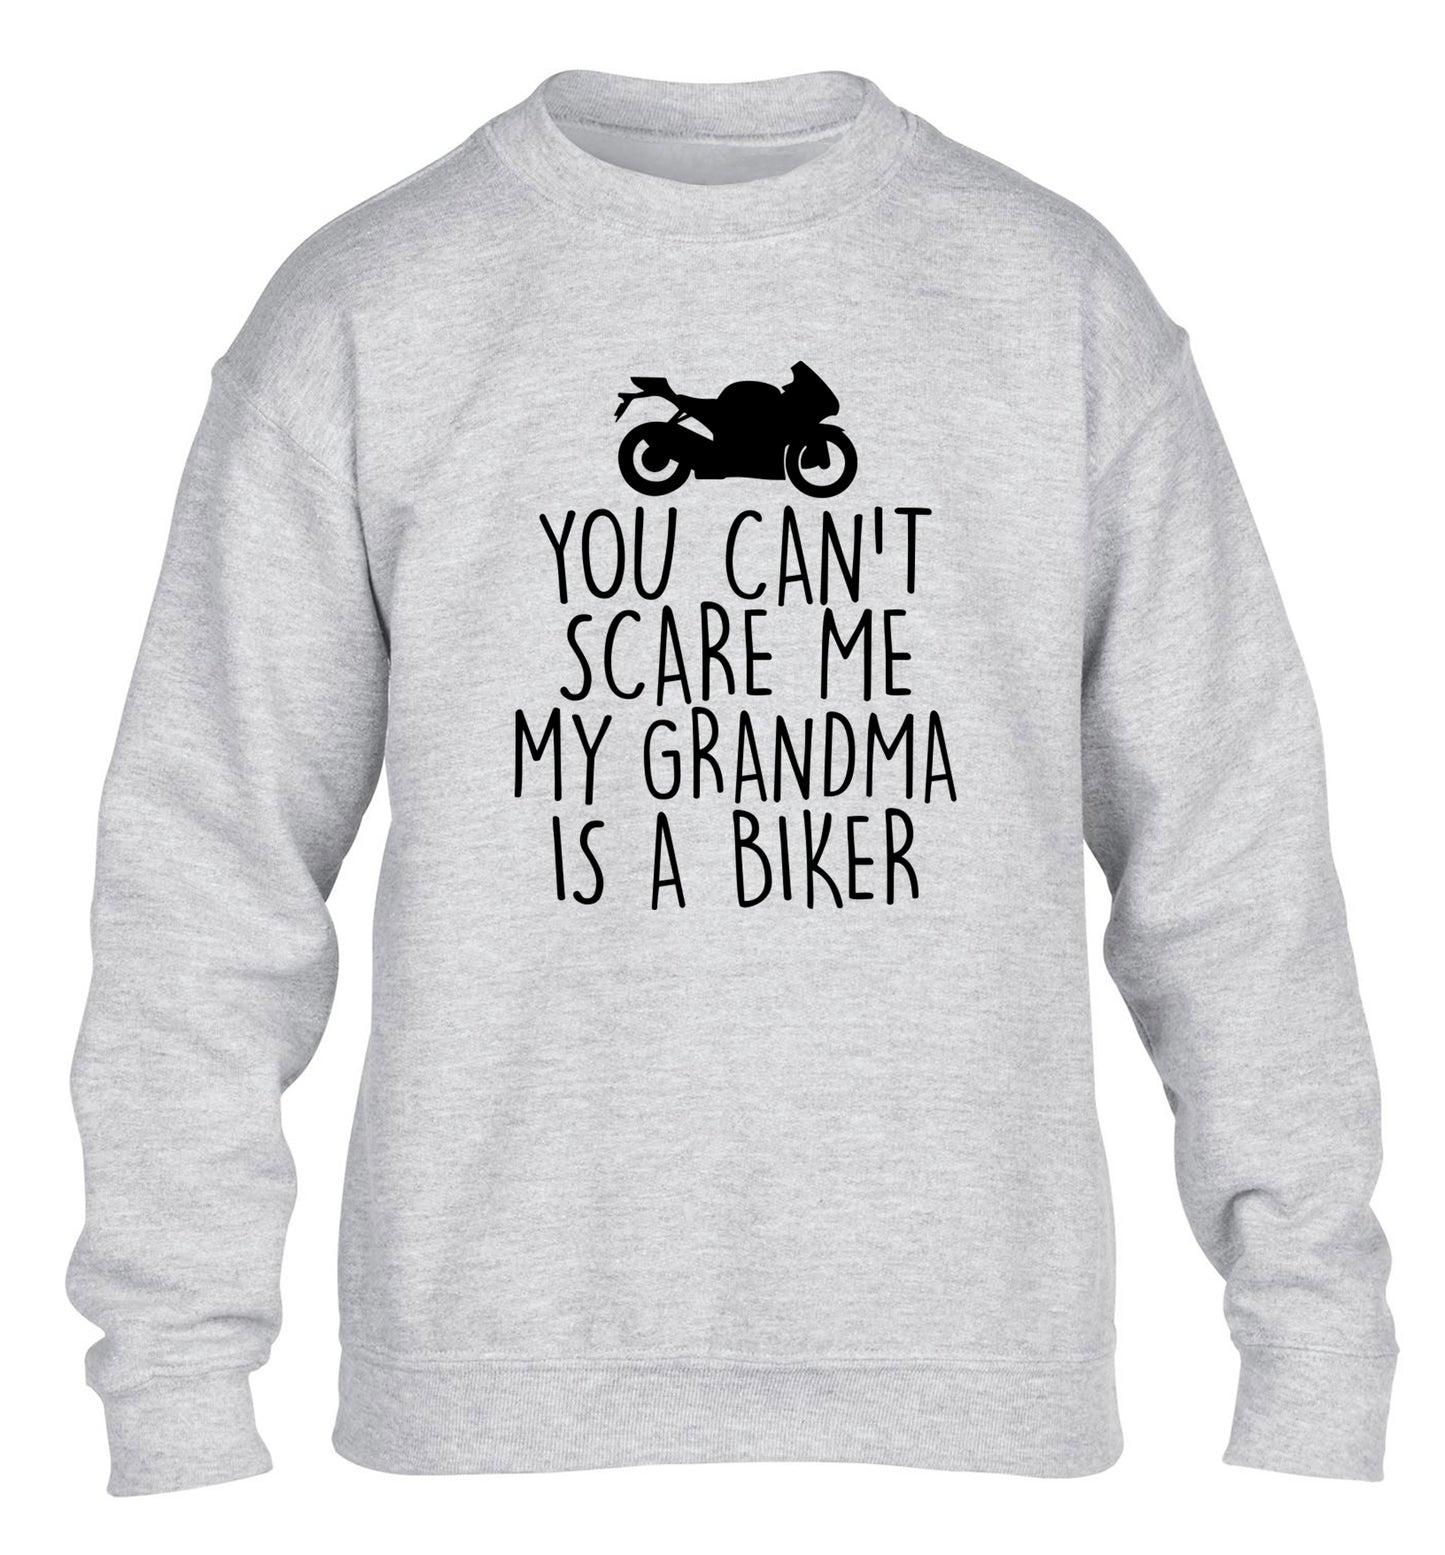 You can't scare me my grandma is a biker children's grey sweater 12-13 Years